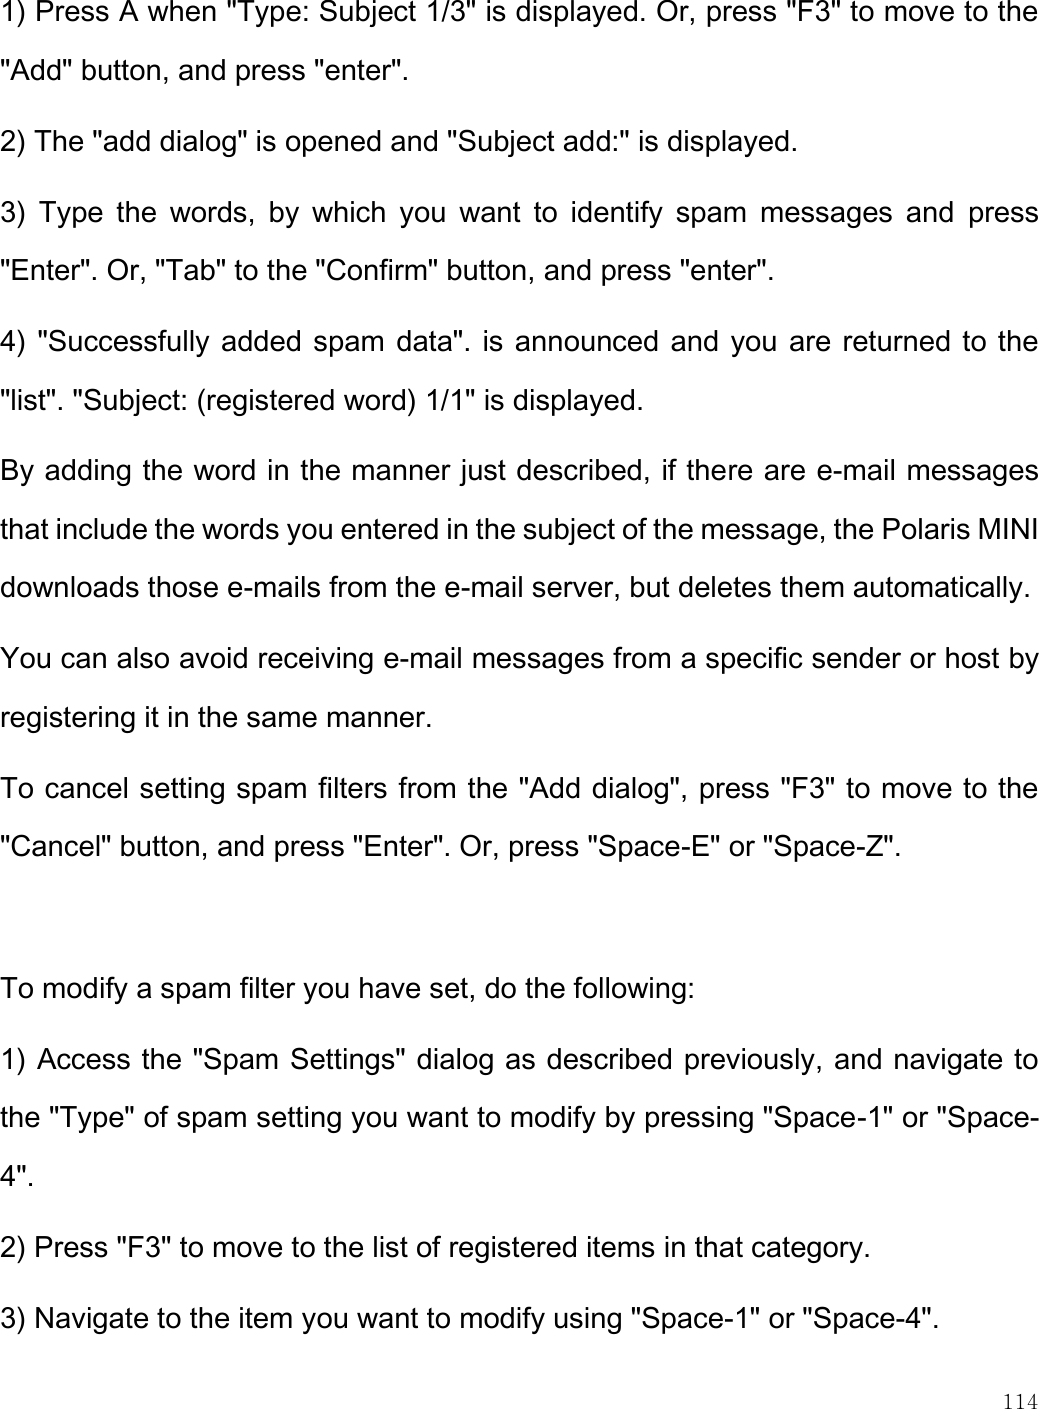    114  1) Press A when &quot;Type: Subject 1/3&quot; is displayed. Or, press &quot;F3&quot; to move to the &quot;Add&quot; button, and press &quot;enter&quot;. 2) The &quot;add dialog&quot; is opened and &quot;Subject add:&quot; is displayed. 3)  Type  the  words,  by  which  you  want  to  identify  spam  messages  and  press &quot;Enter&quot;. Or, &quot;Tab&quot; to the &quot;Confirm&quot; button, and press &quot;enter&quot;.  4) &quot;Successfully added spam data&quot;. is announced and you are returned to the &quot;list&quot;. &quot;Subject: (registered word) 1/1&quot; is displayed. By adding the word in the manner just described, if there are e-mail messages that include the words you entered in the subject of the message, the Polaris MINI downloads those e-mails from the e-mail server, but deletes them automatically.  You can also avoid receiving e-mail messages from a specific sender or host by registering it in the same manner. To cancel setting spam filters from the &quot;Add dialog&quot;, press &quot;F3&quot; to move to the &quot;Cancel&quot; button, and press &quot;Enter&quot;. Or, press &quot;Space-E&quot; or &quot;Space-Z&quot;.   To modify a spam filter you have set, do the following: 1) Access the &quot;Spam Settings&quot; dialog as described previously, and navigate to the &quot;Type&quot; of spam setting you want to modify by pressing &quot;Space-1&quot; or &quot;Space-4&quot;.  2) Press &quot;F3&quot; to move to the list of registered items in that category.  3) Navigate to the item you want to modify using &quot;Space-1&quot; or &quot;Space-4&quot;.  